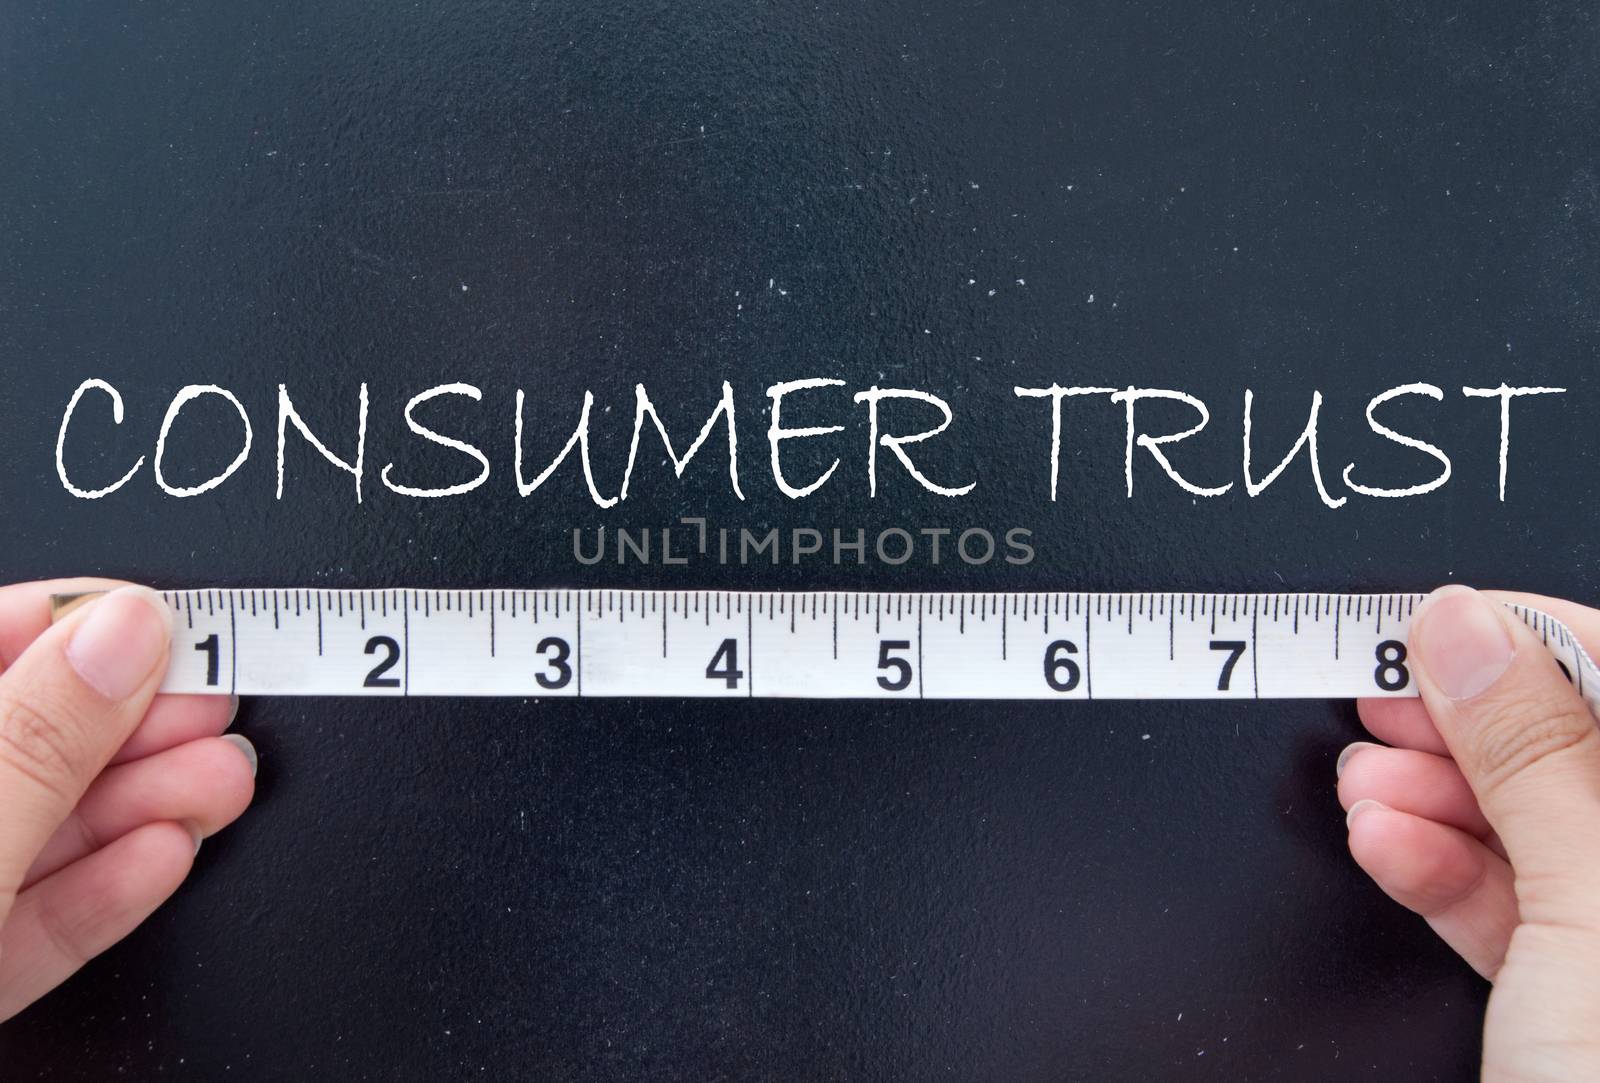 Hands measuring consumer trust on a chalkboard